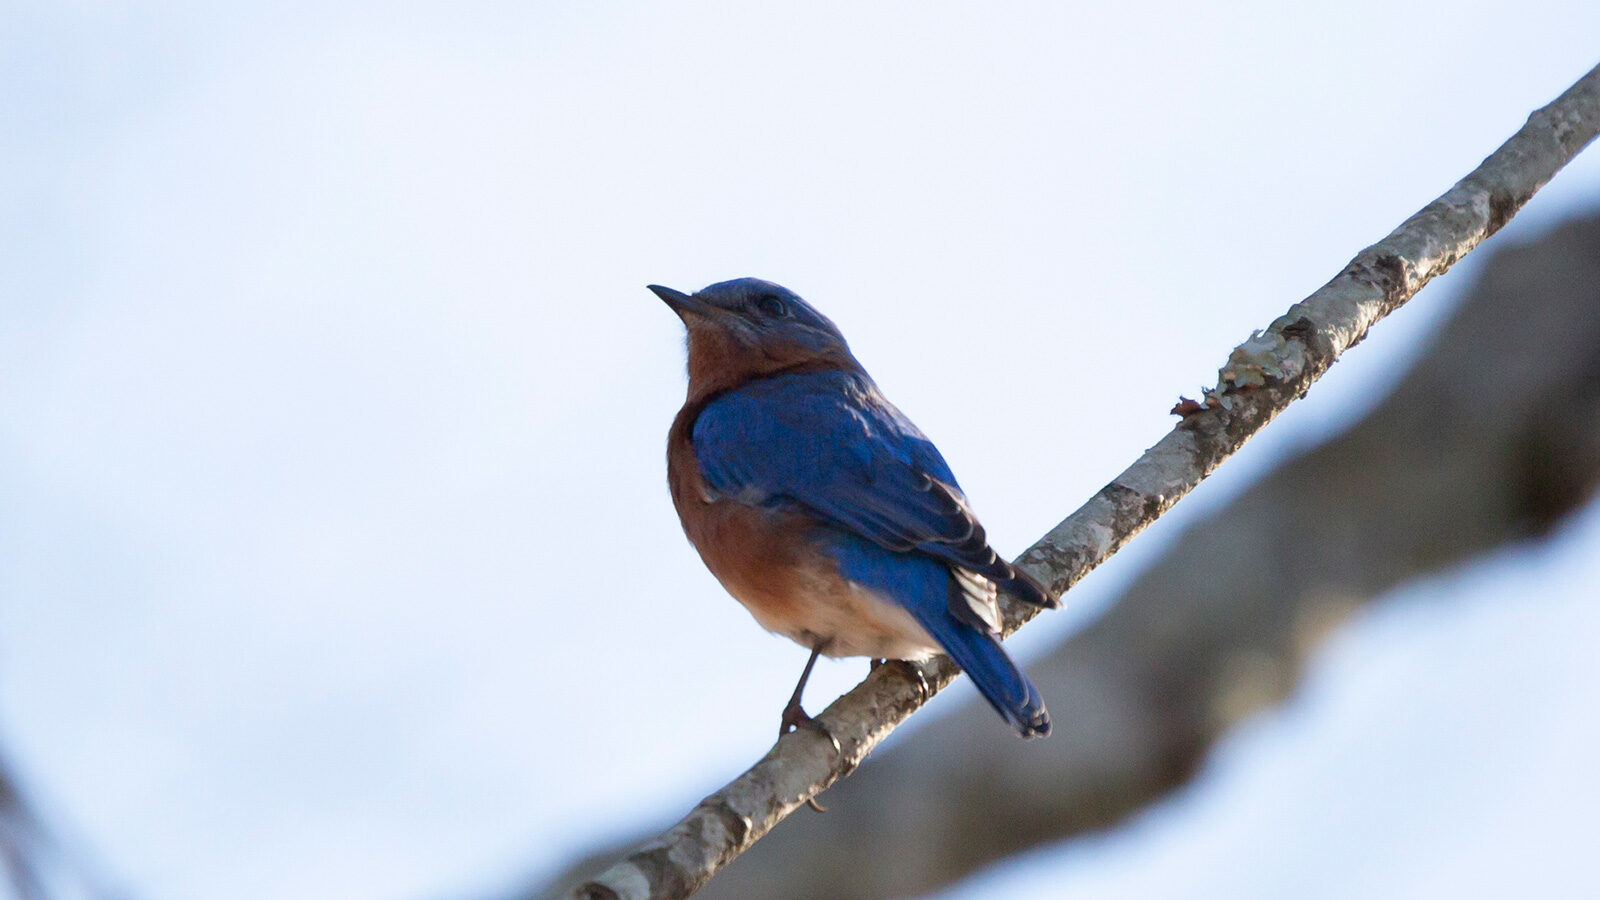 Eastern bluebird perched on a branch